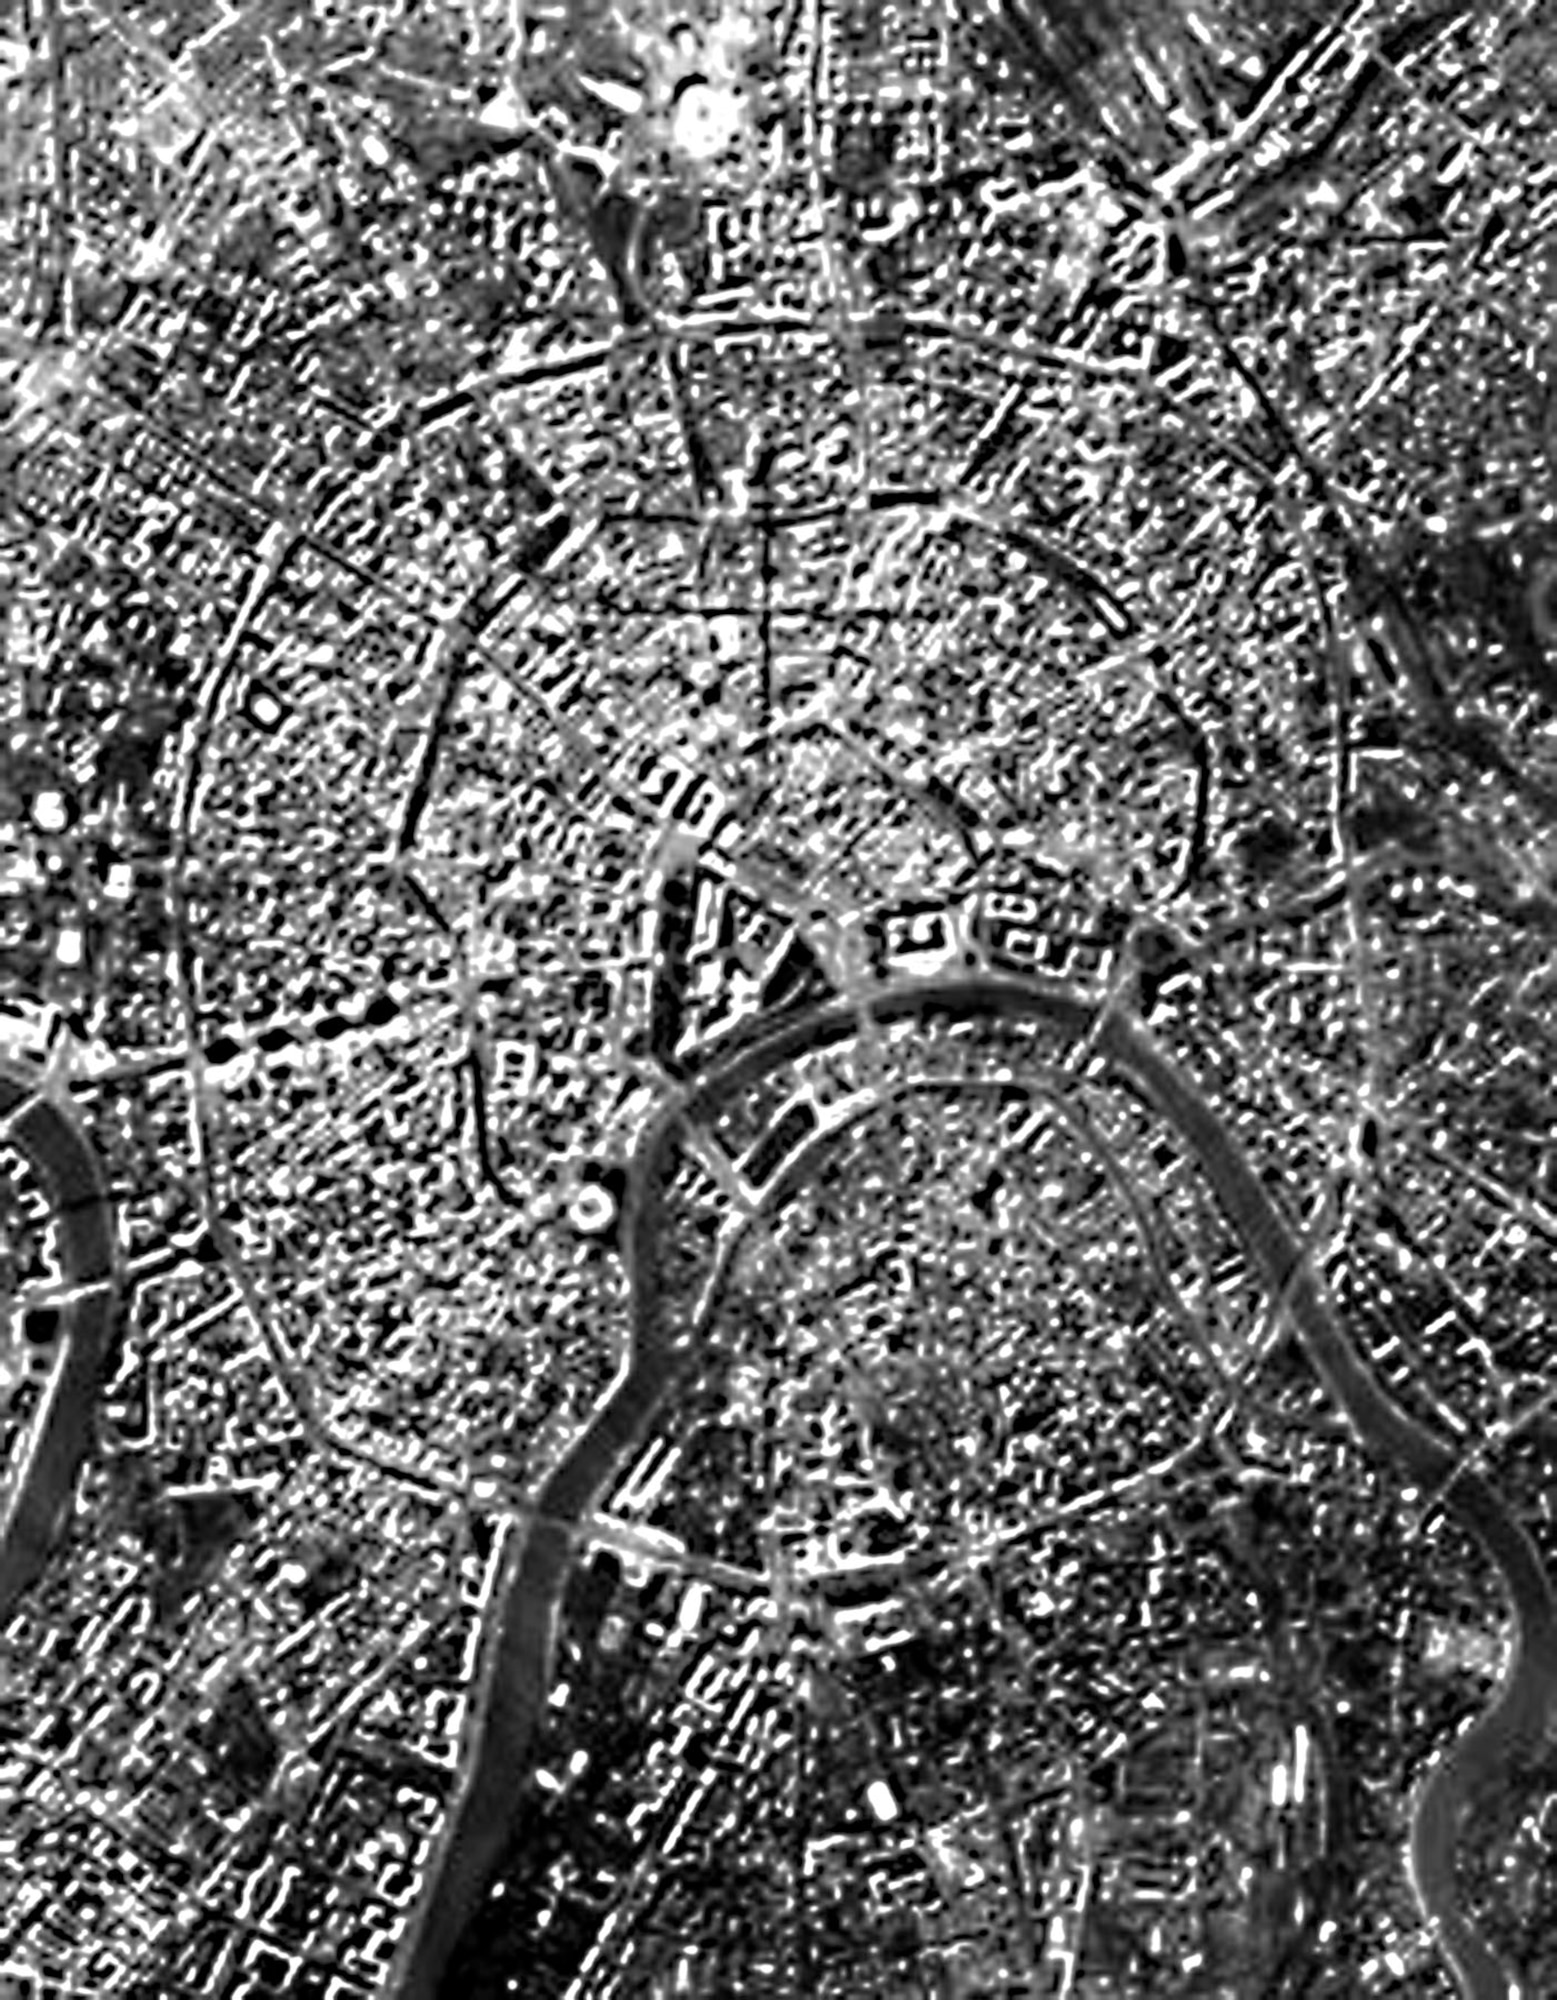 HEXAGON mapping camera image of Moscow, USSR, April 6, 1979. (Photo courtesy of U.S. Geological Survey)